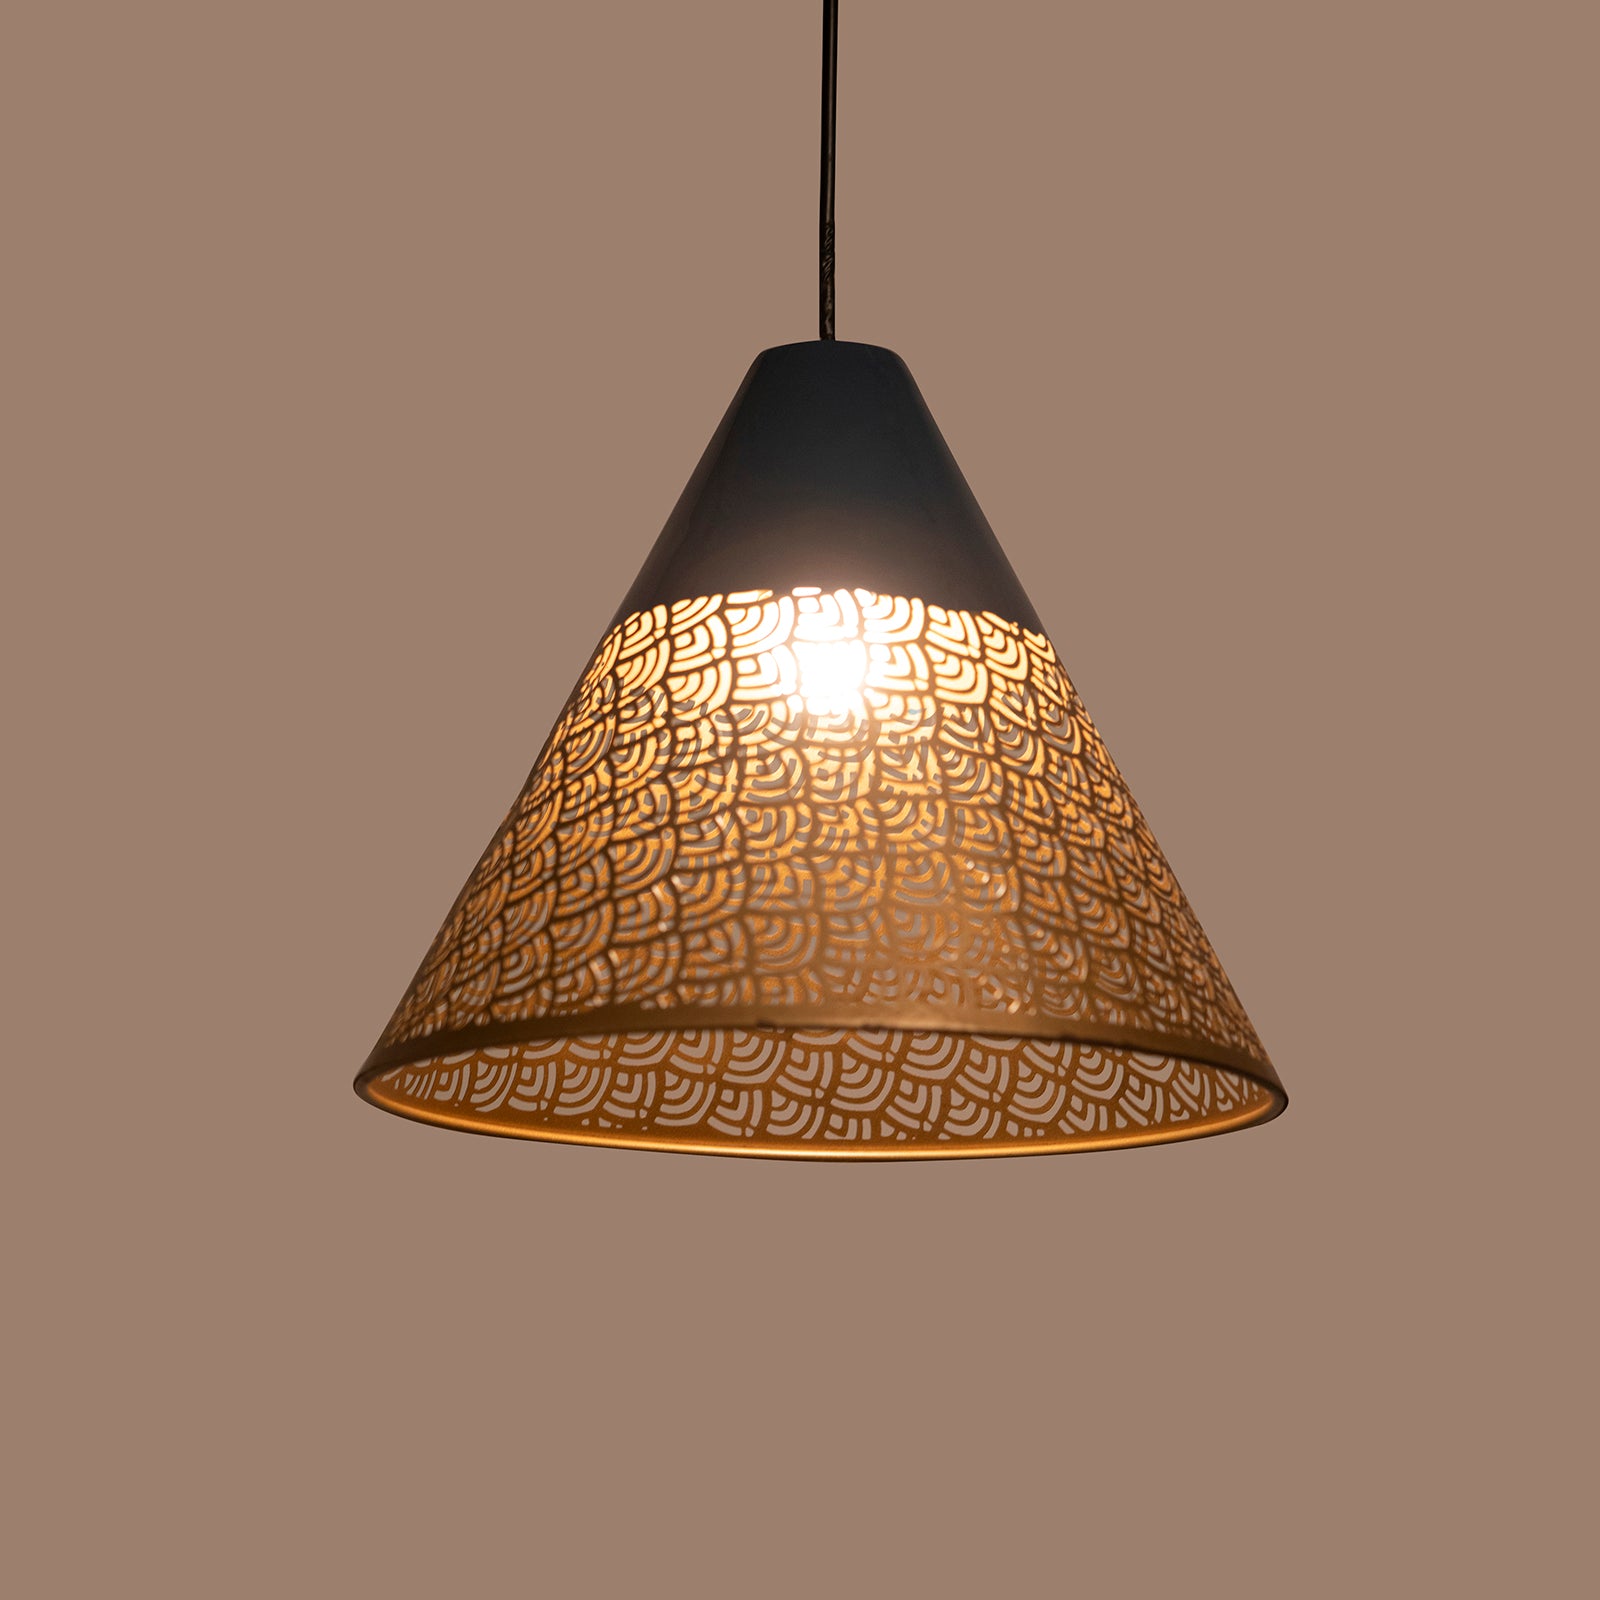 Ralph Conical Hanging Lamp